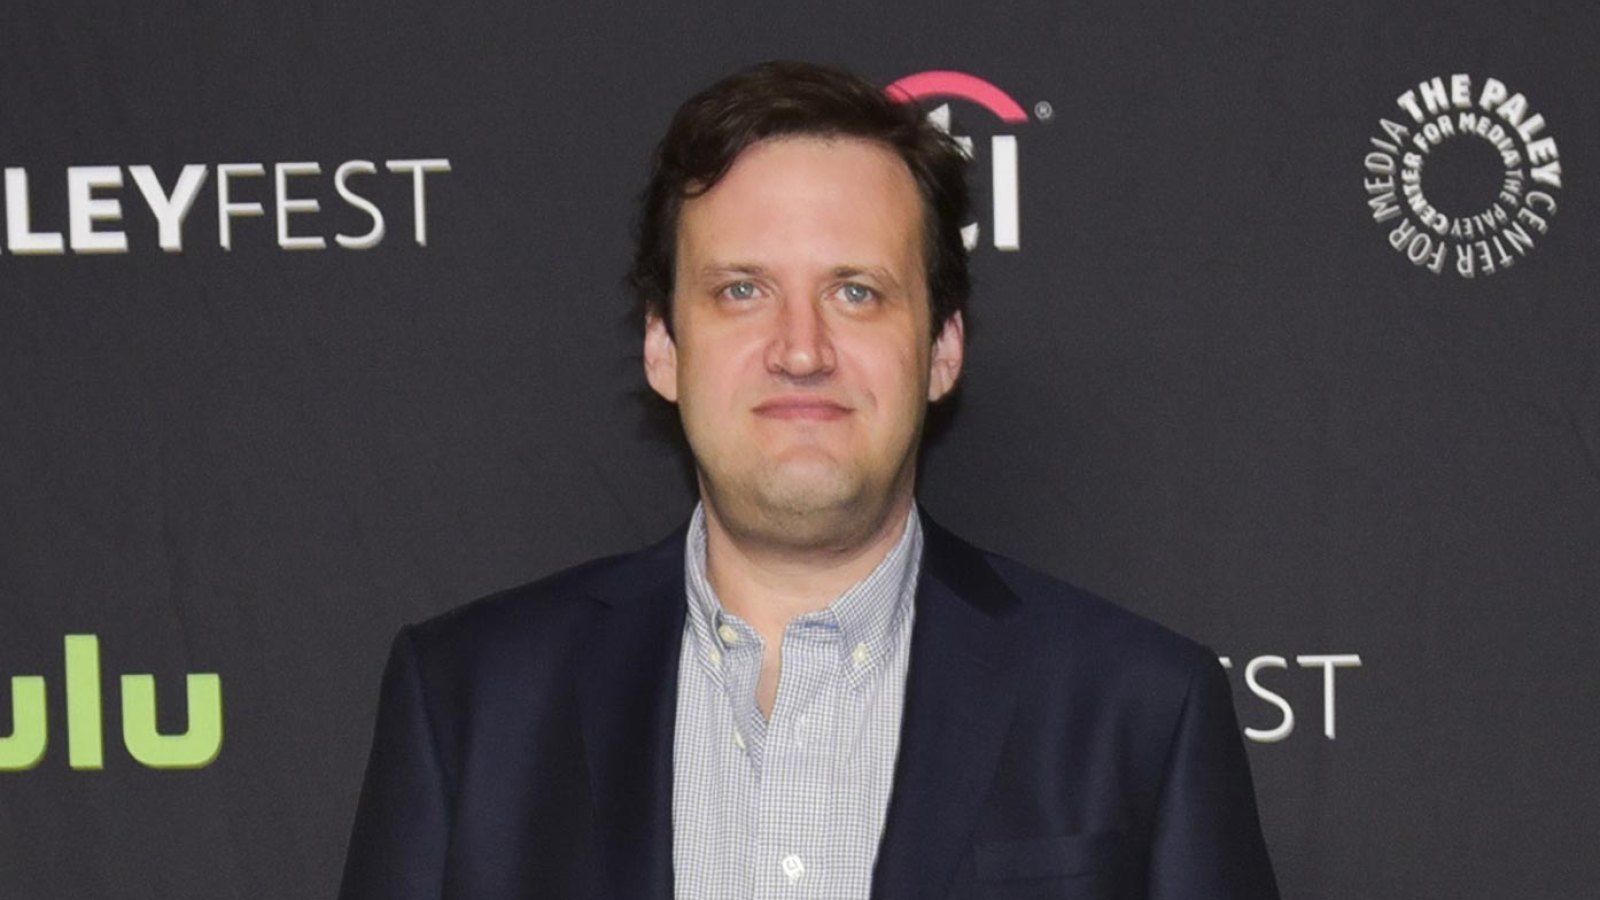 The Flash Executive Producer Andrew Kreisberg Arrested for Forcible Touching at Bar Mitzvah 479